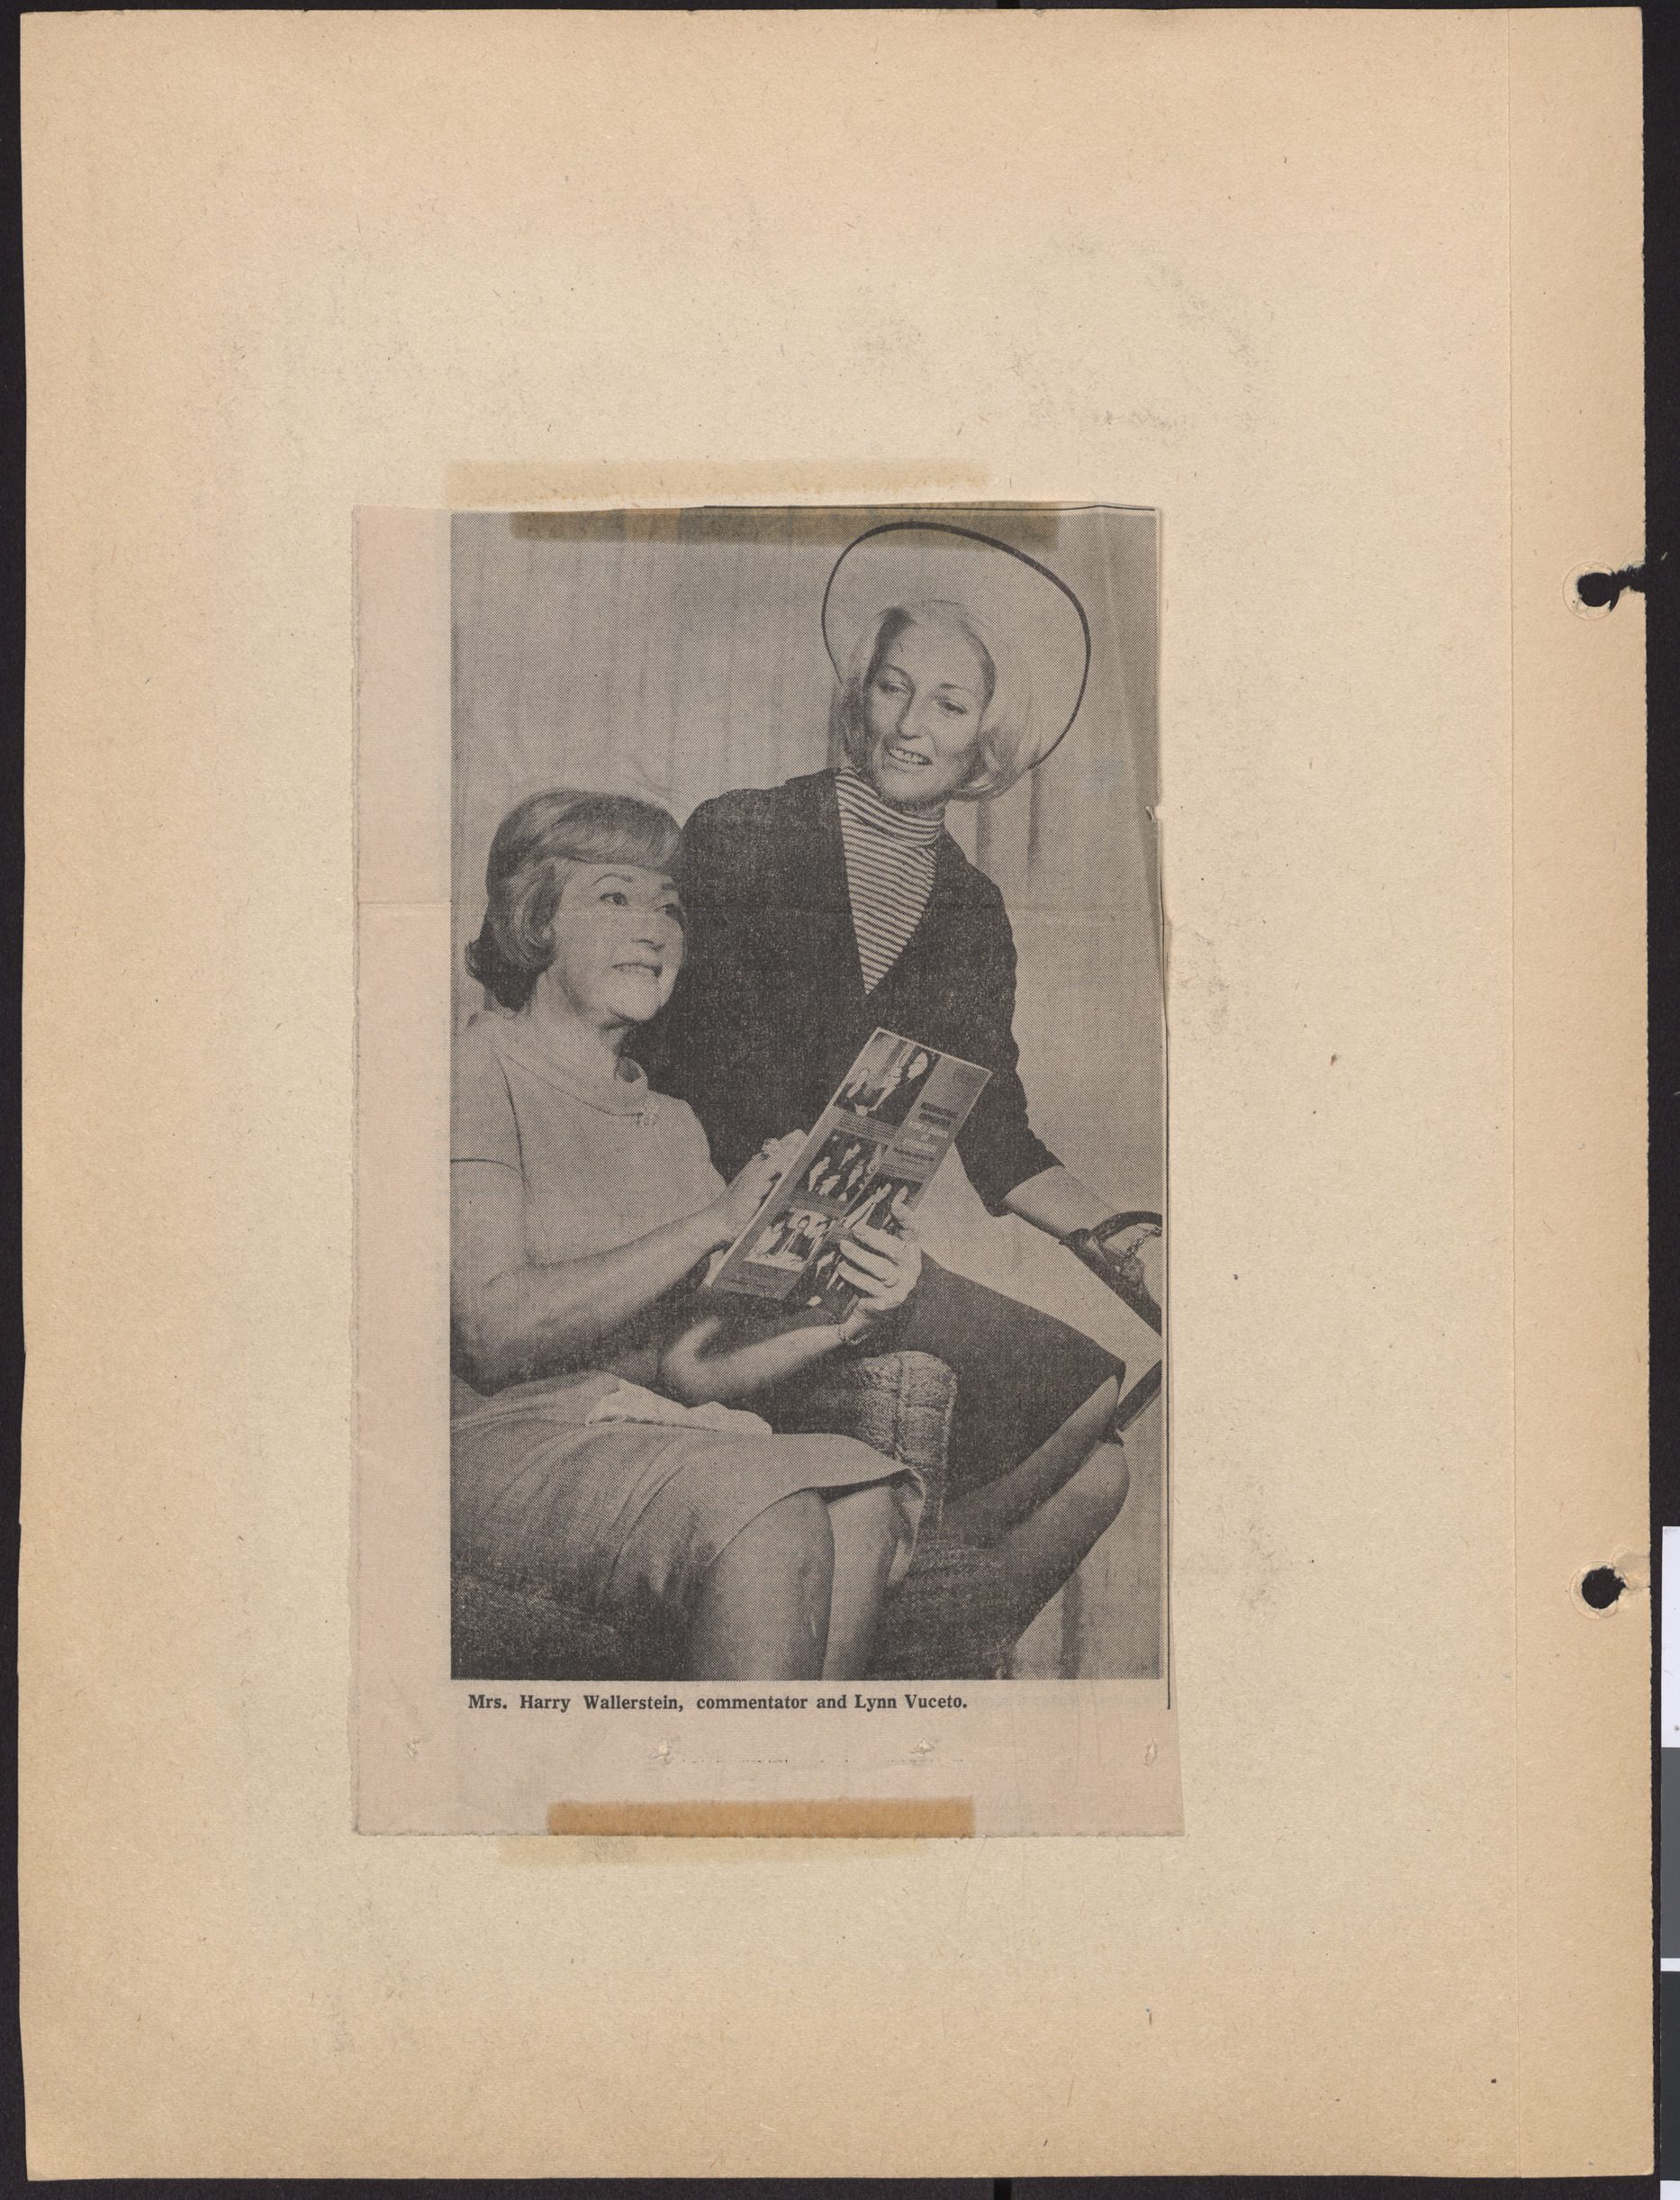 Newspaper clipping, Mrs. Harry Wallerstein and Lynn Vuceto, publication and date unknown